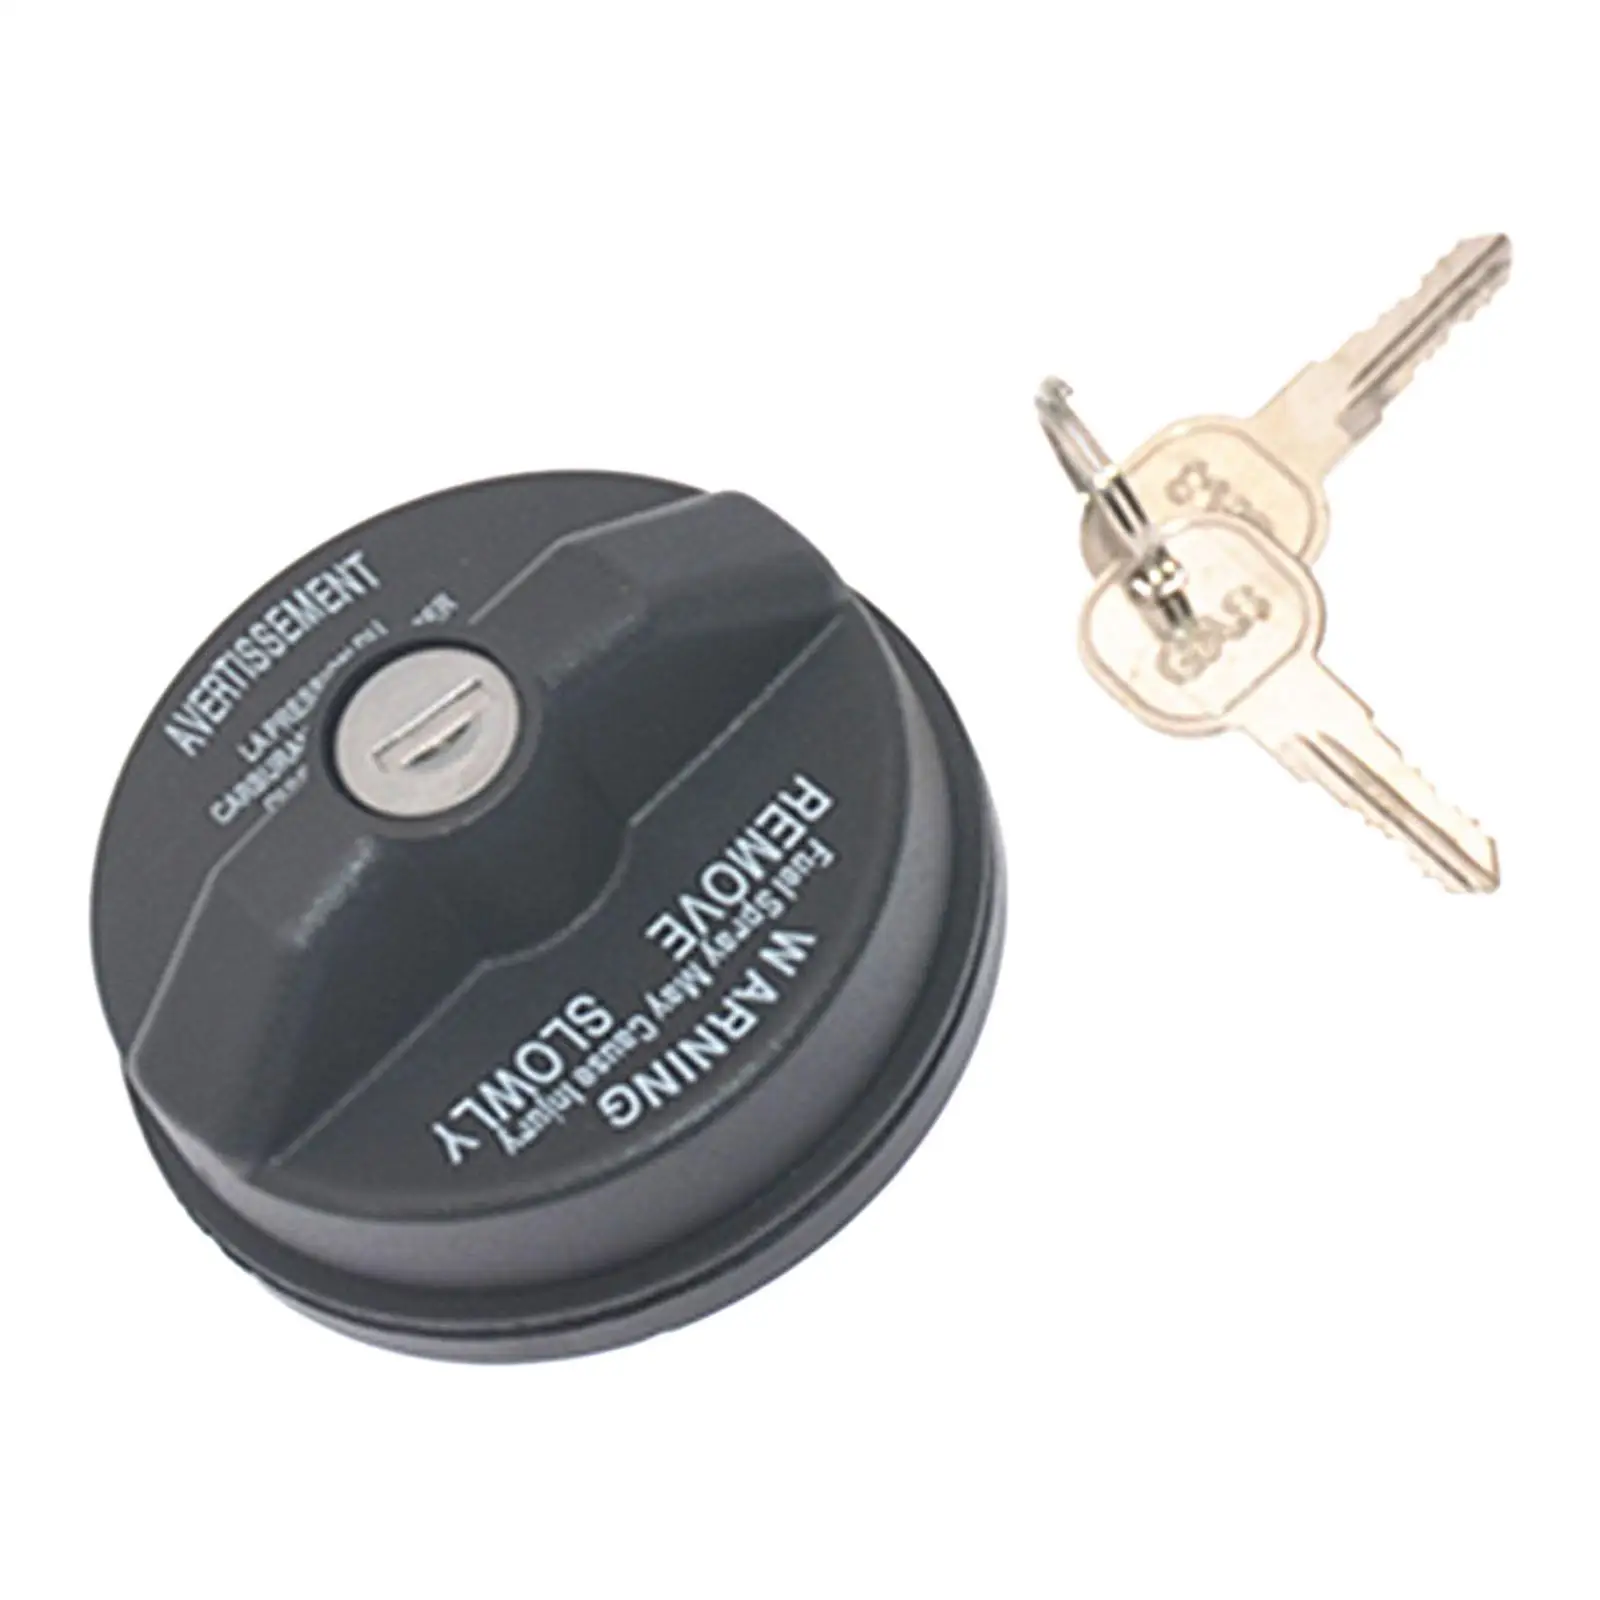 Locking Gas Fuel Cap Replacement Accessories Easy to Install Durable